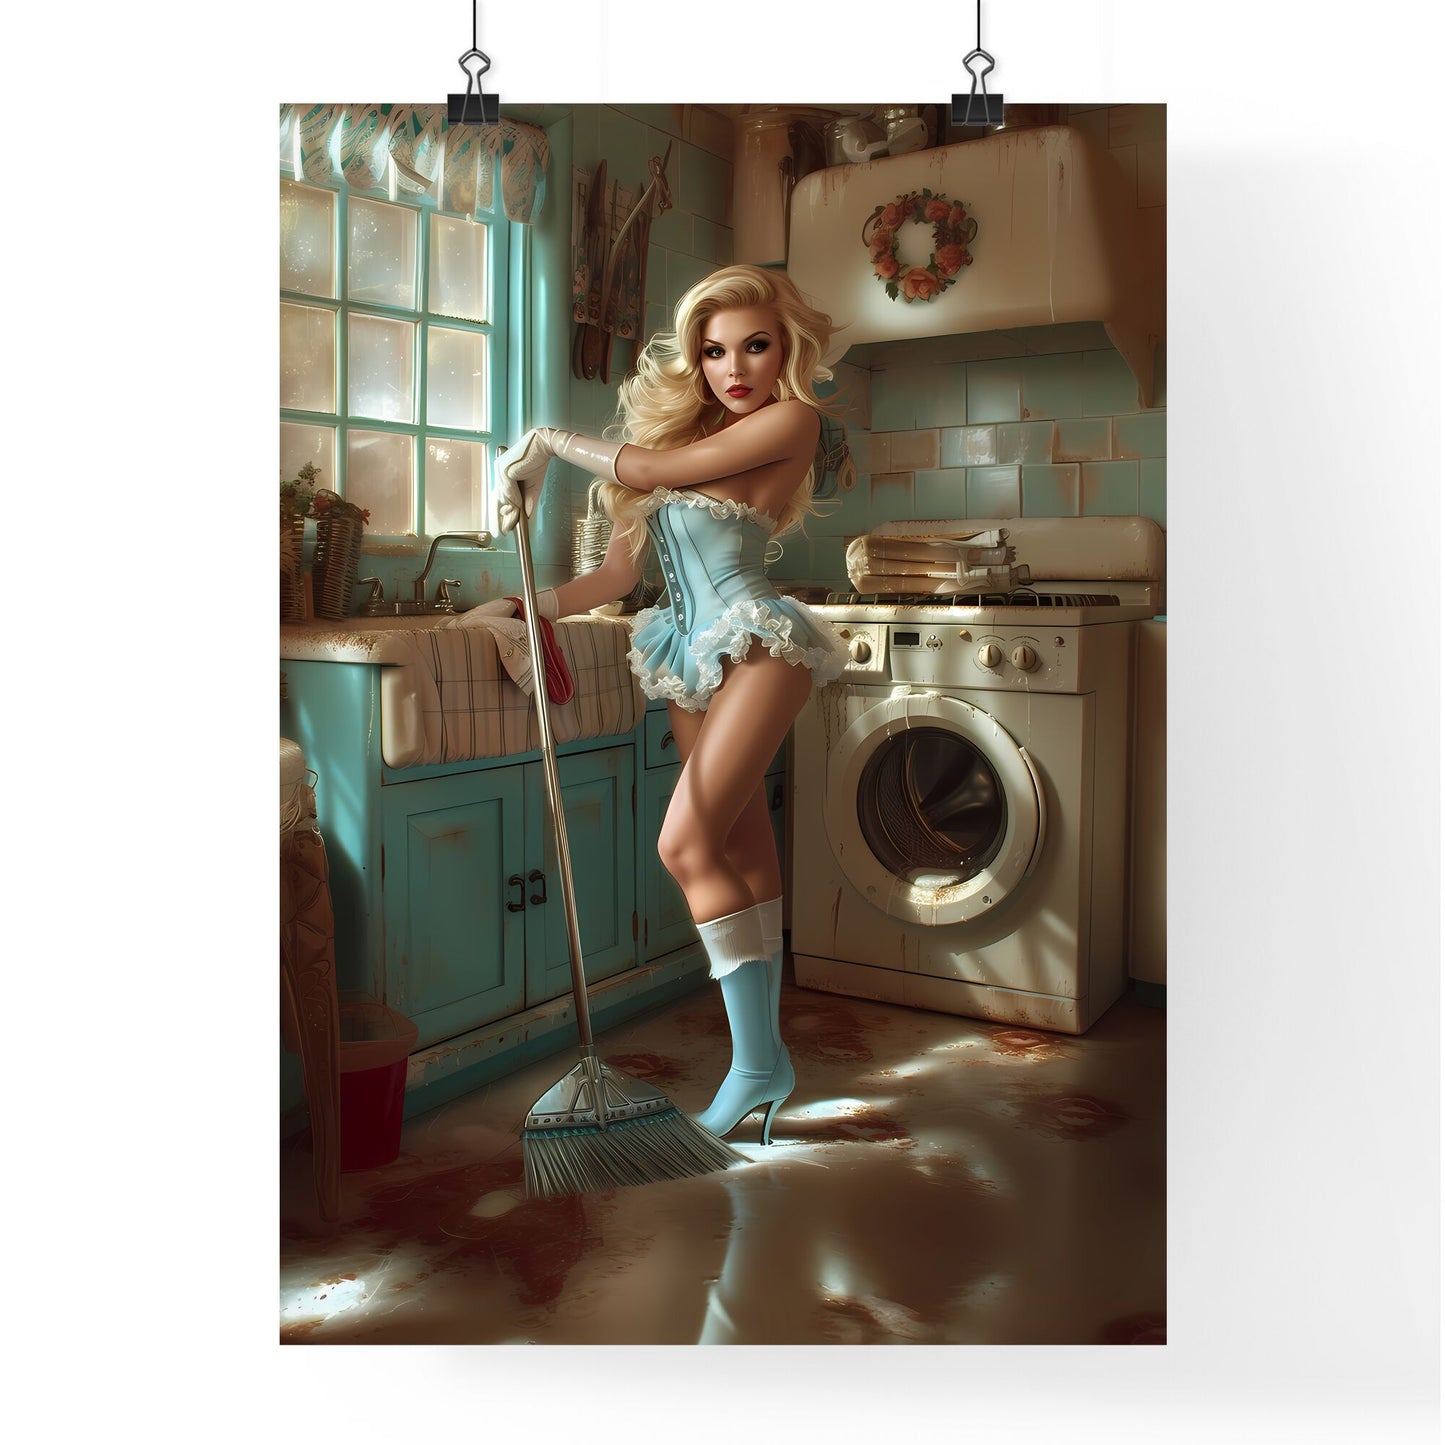 Housewife - Art print of a woman in a kitchen Default Title